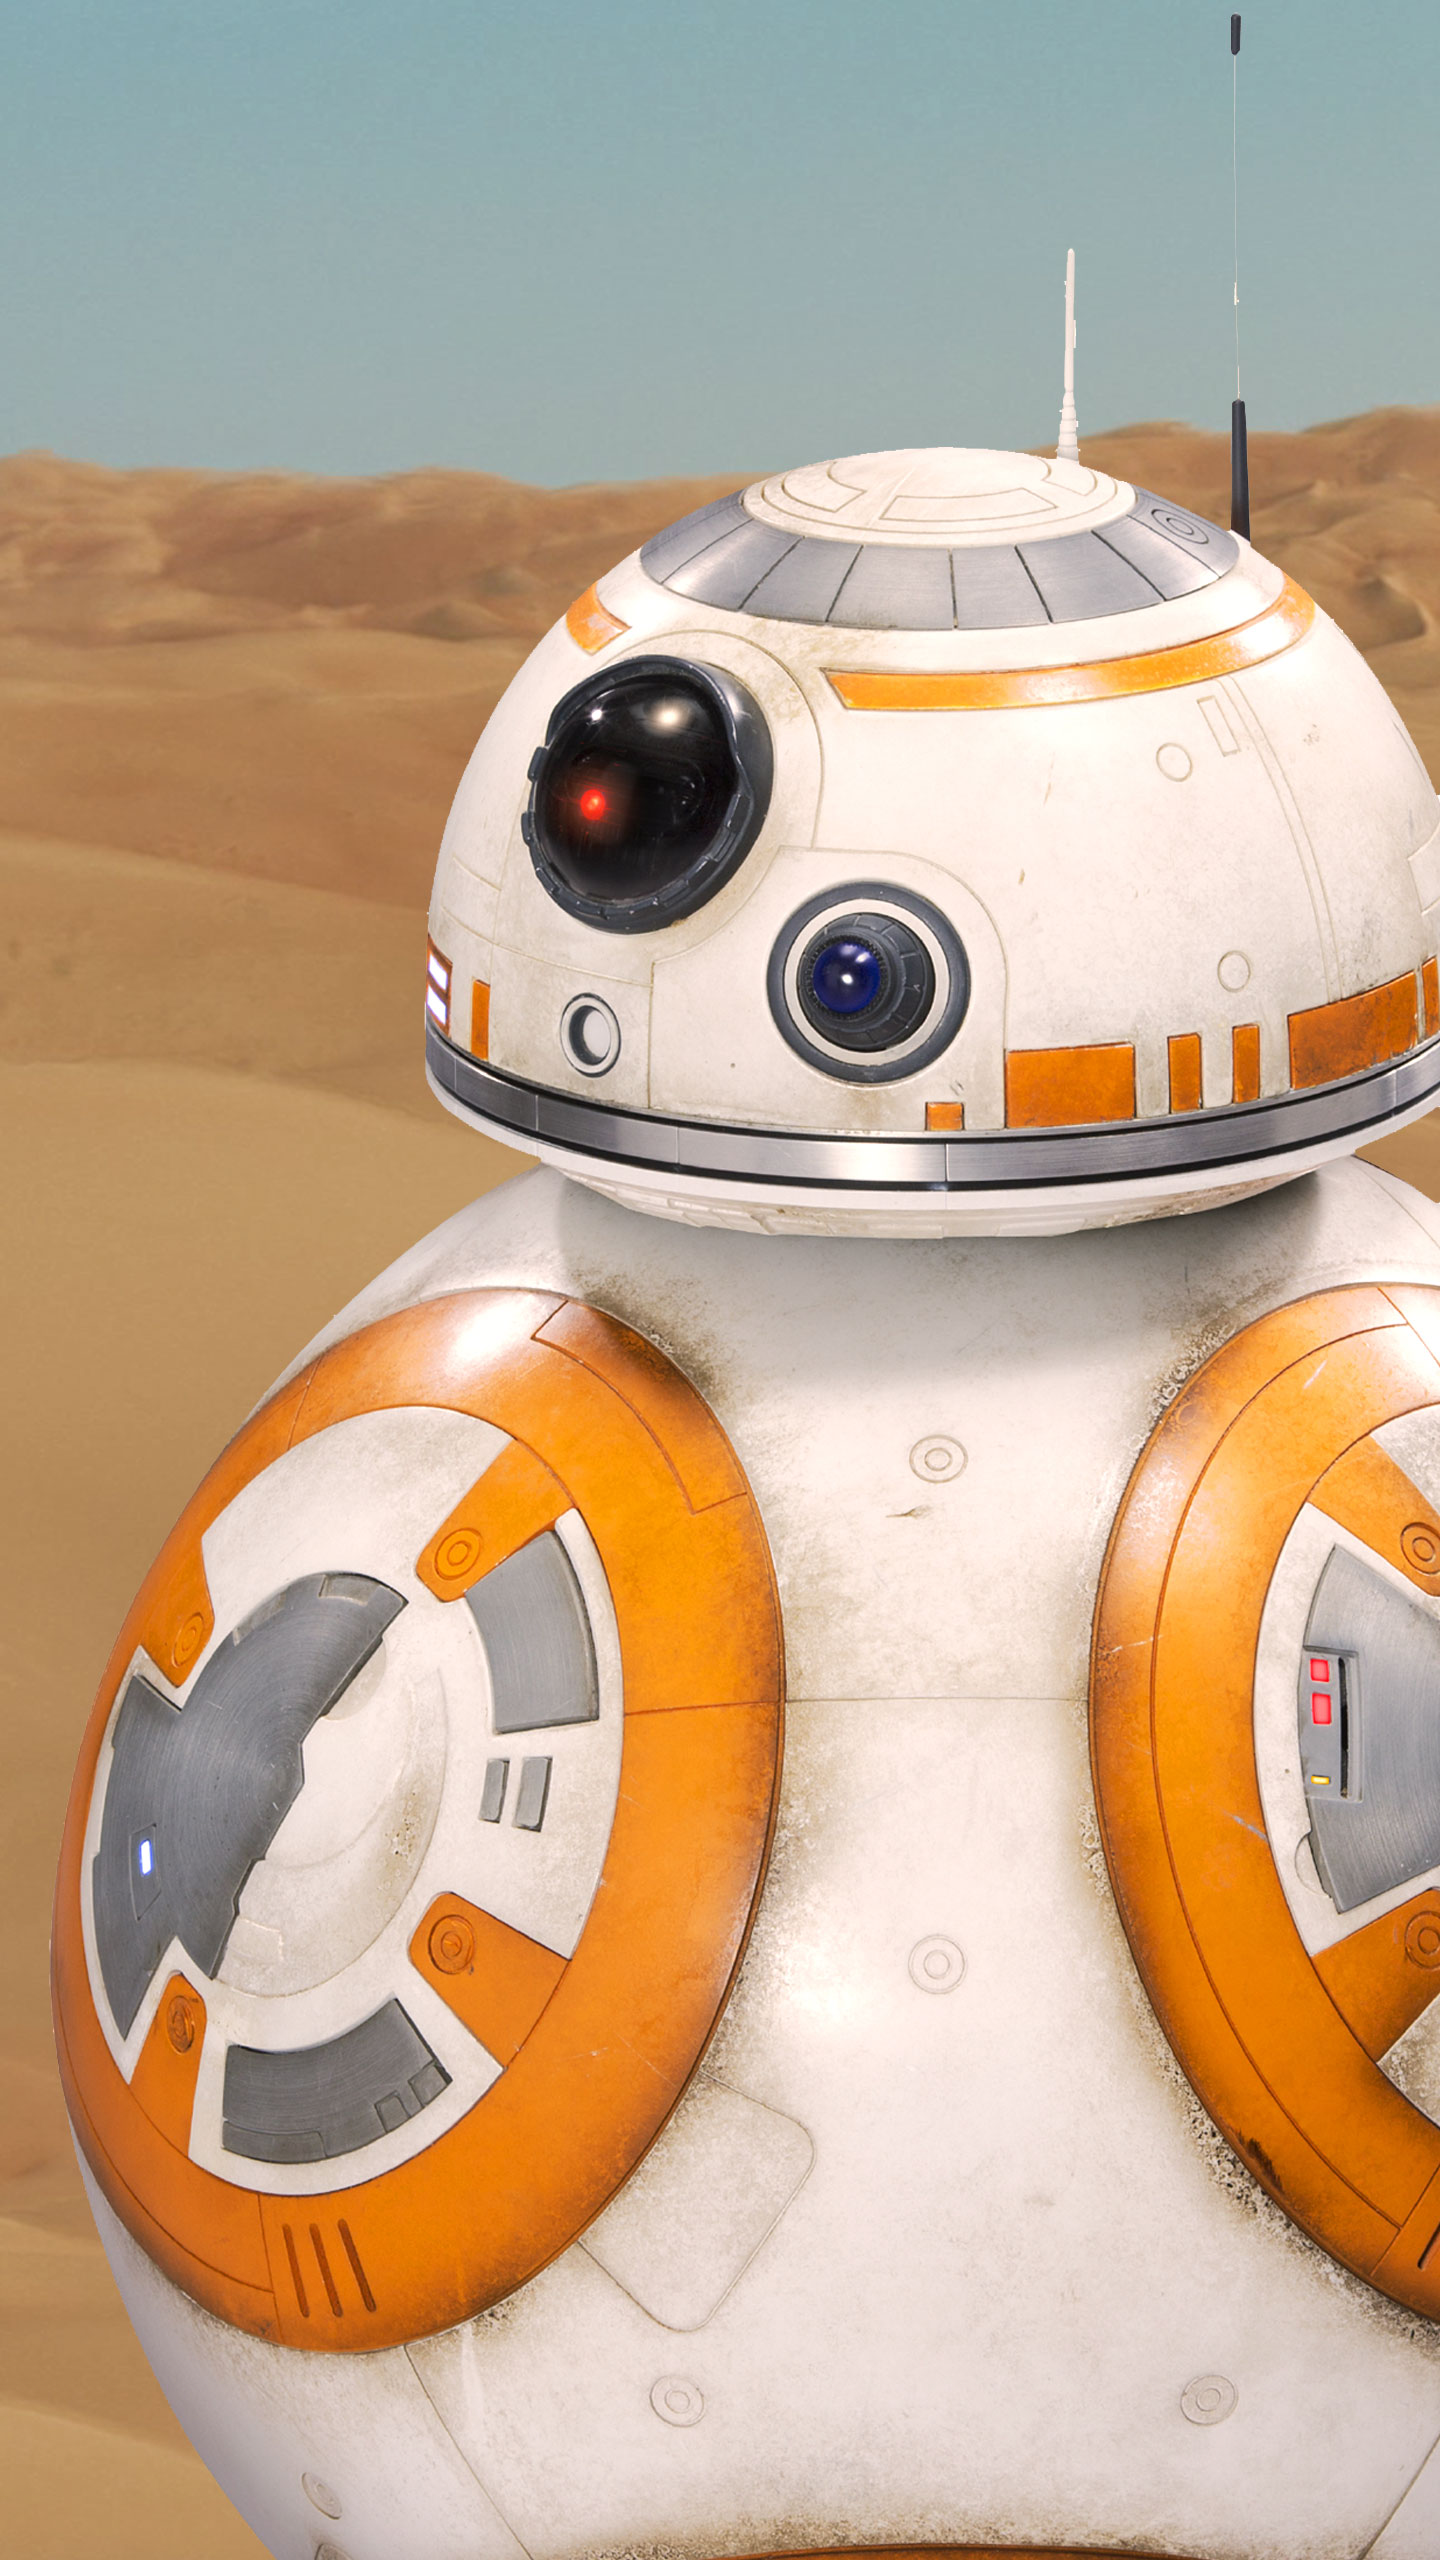 Star Wars The Force Awakens Photos Show Tiniest Details